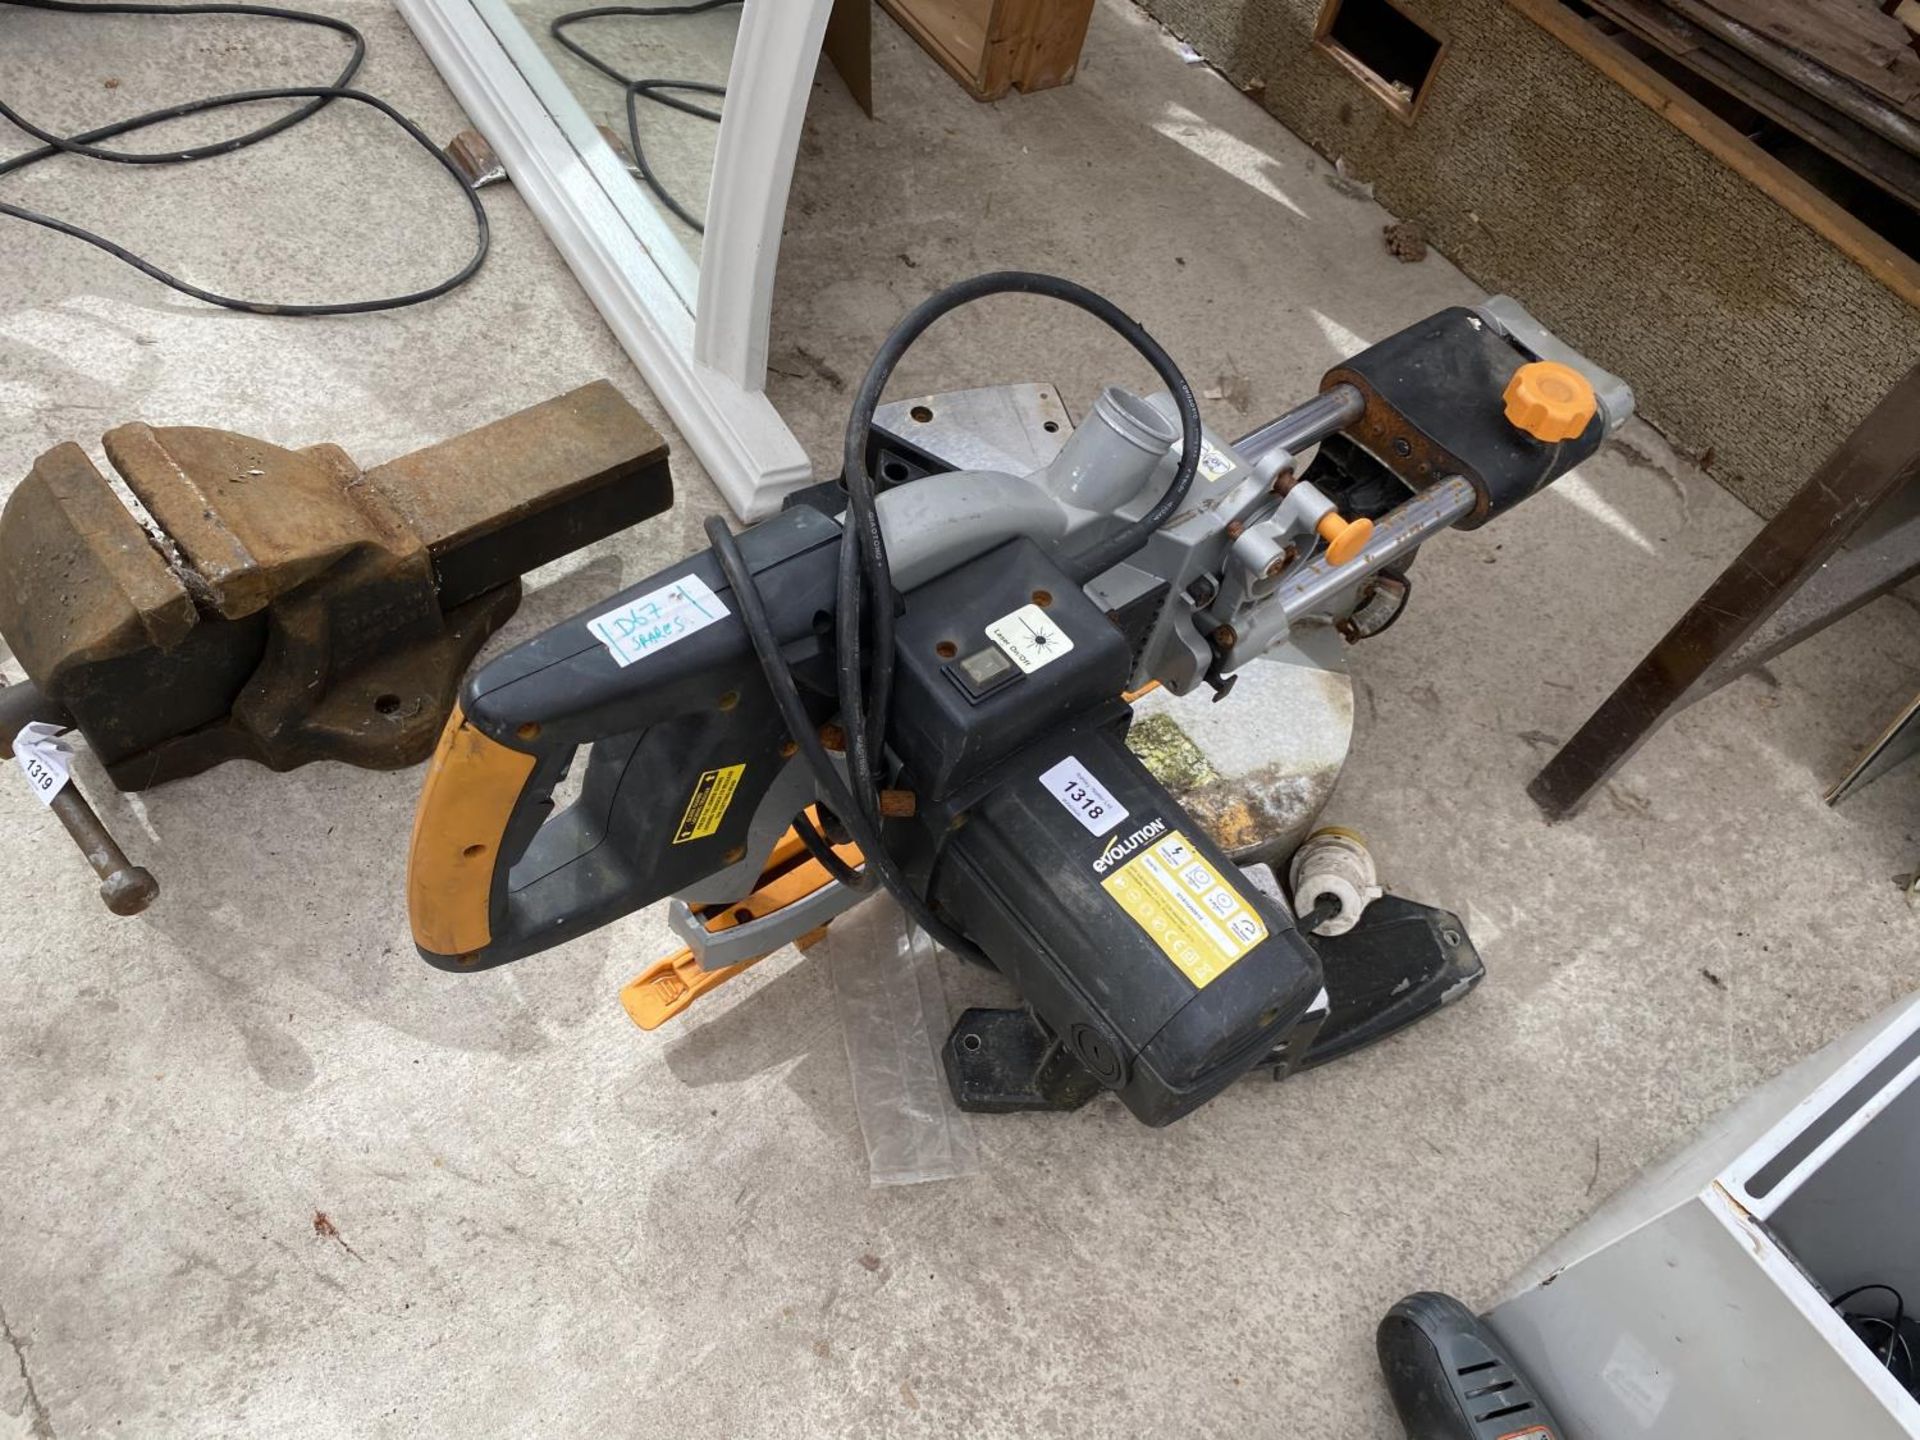 AN EVOLUTION POWER COMPOUND MITRE SAW, IN WORKING ORDER